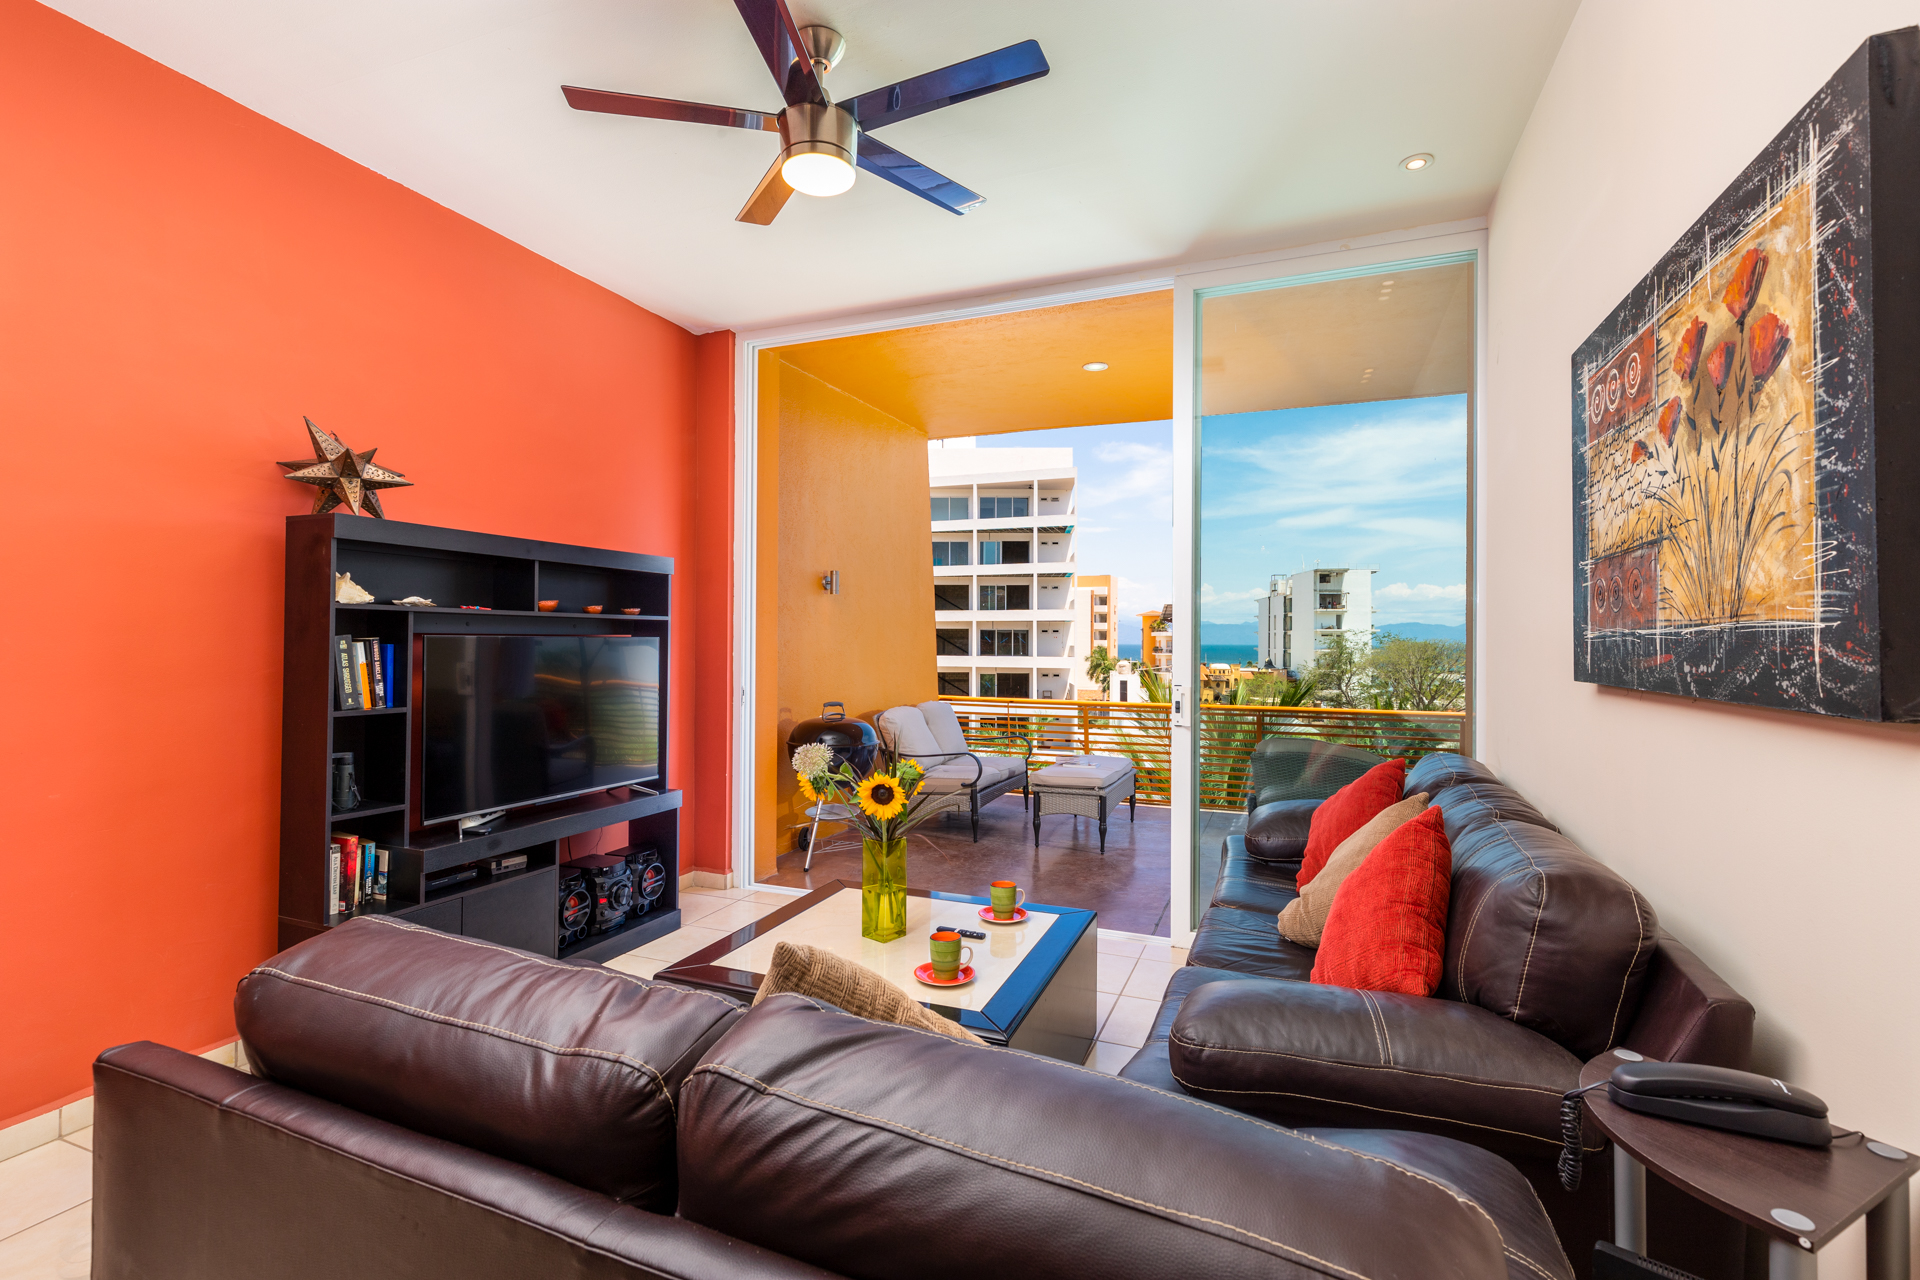 Fully equipped living room with T:V ceiling fan A/C and WiFi access.